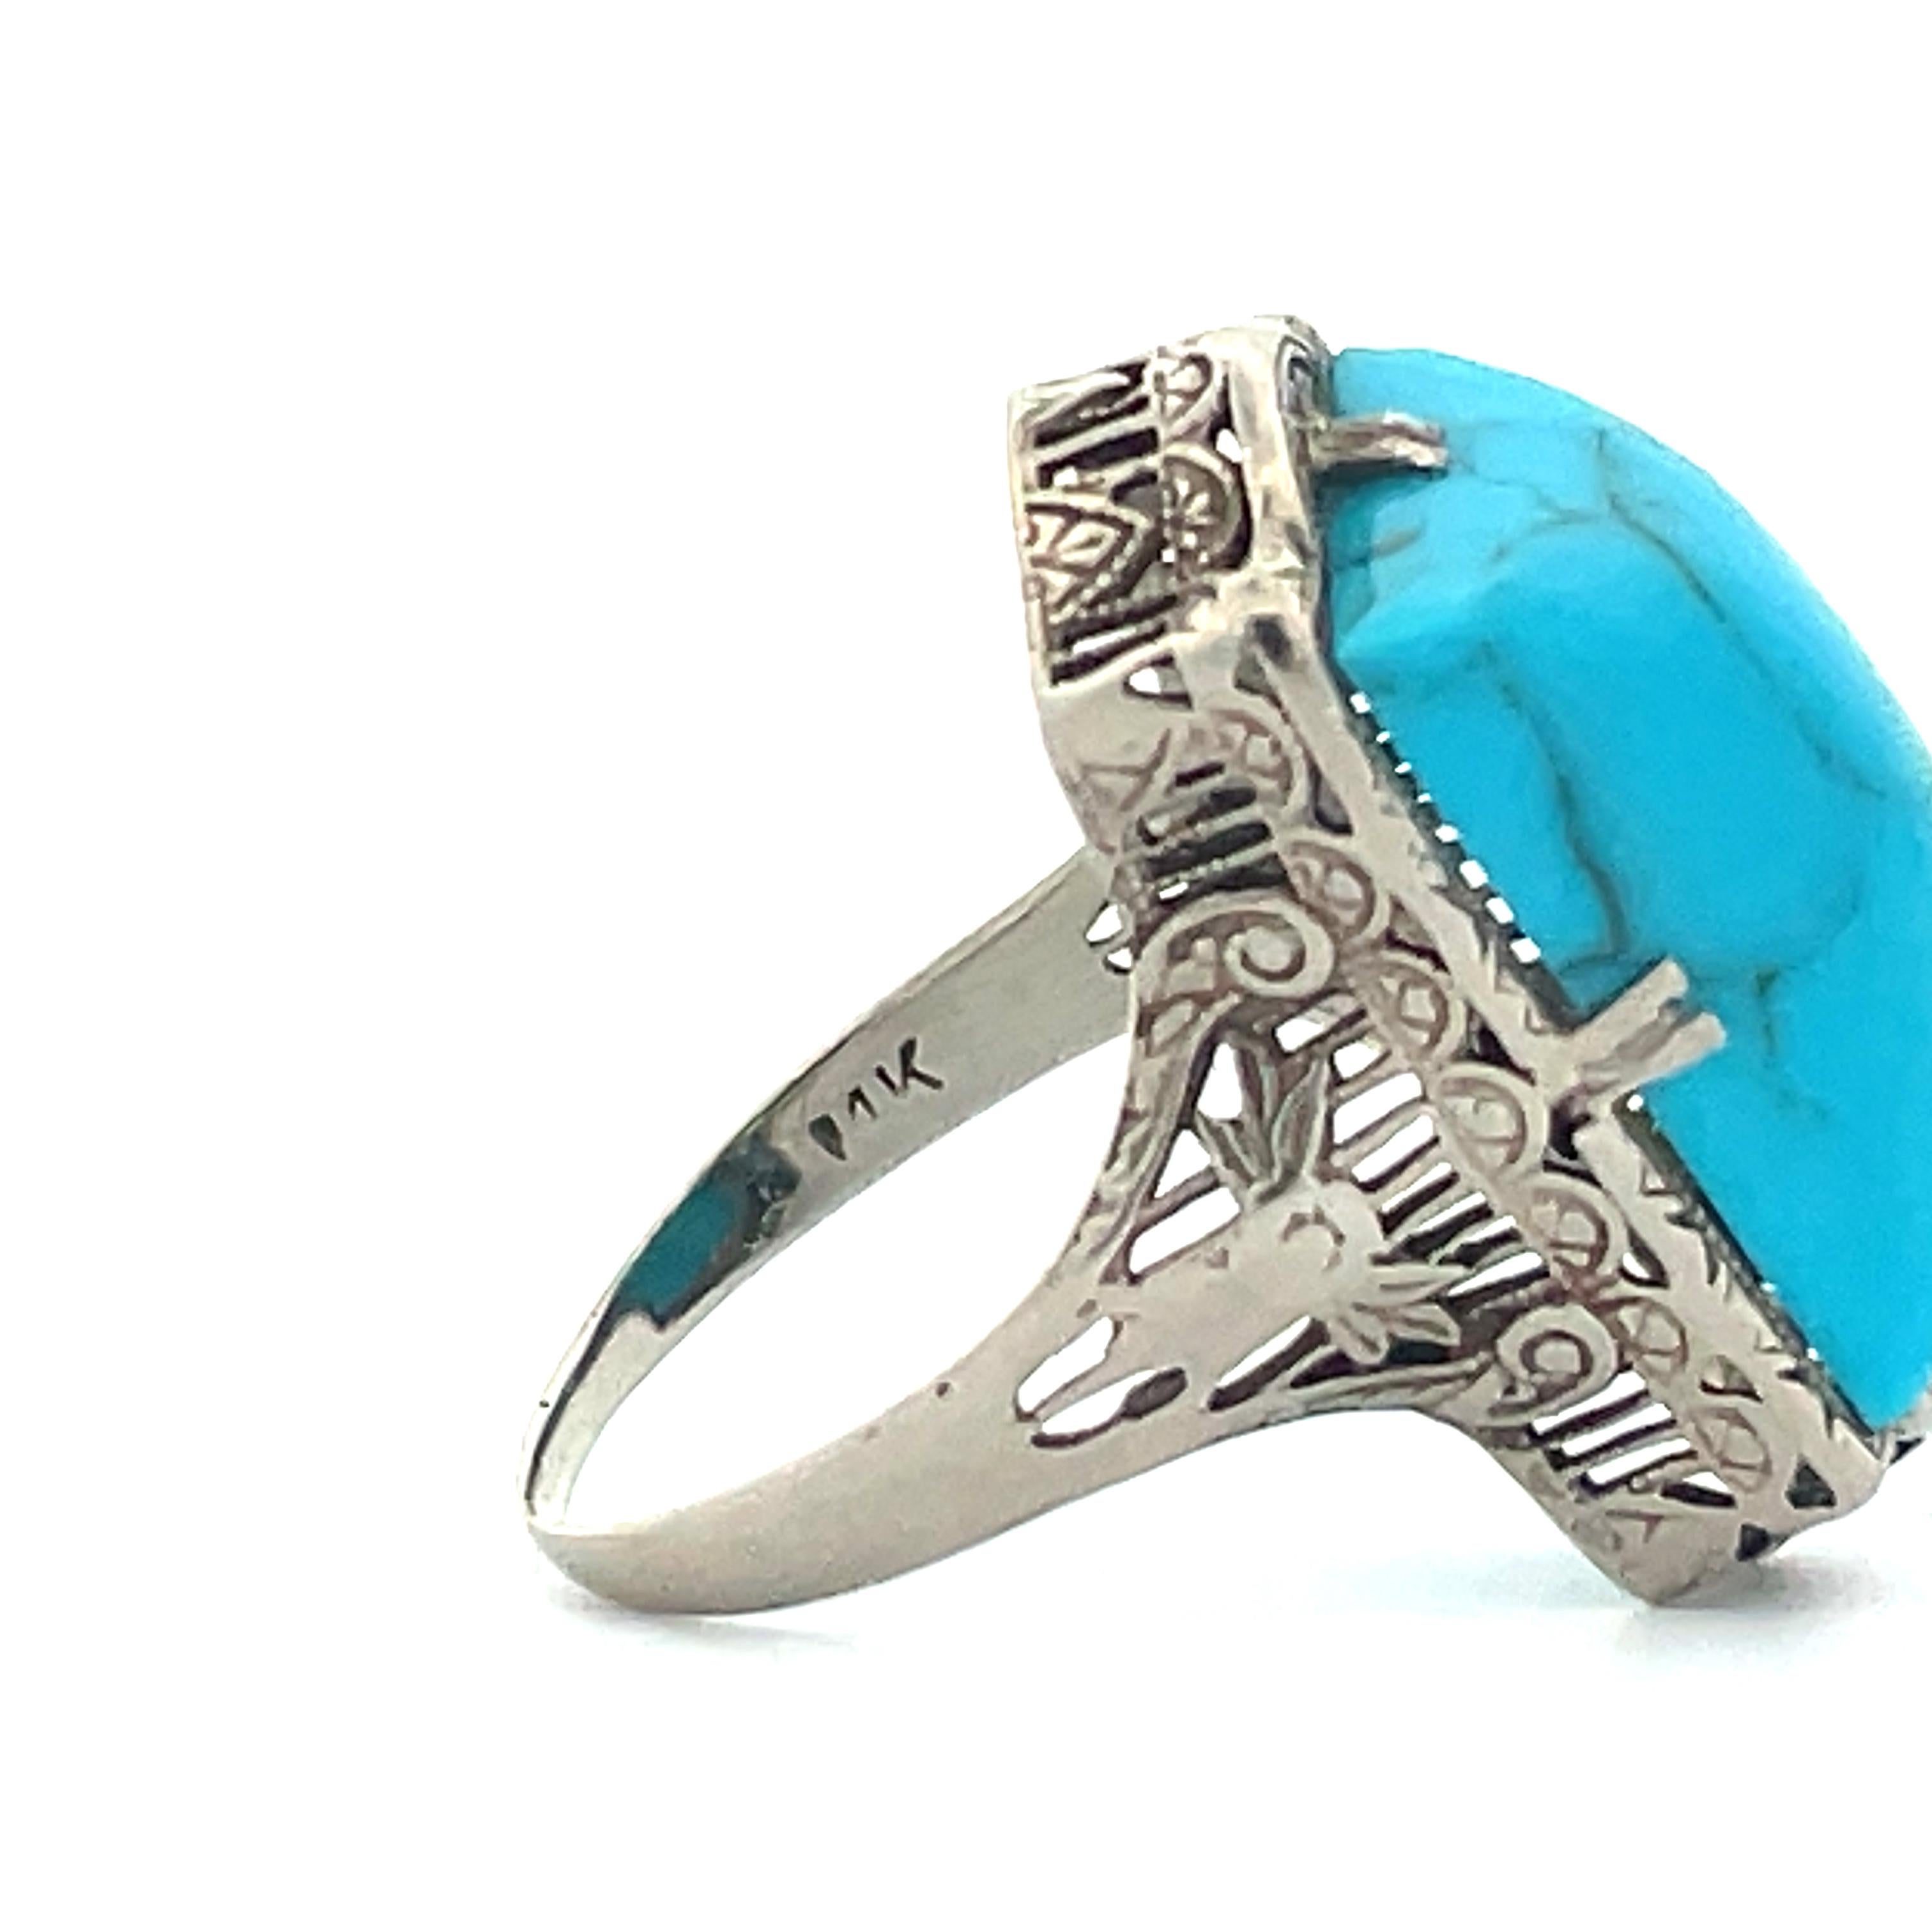  1920s 14k White Gold and Turquoise Cabochon Filigree Ring  3